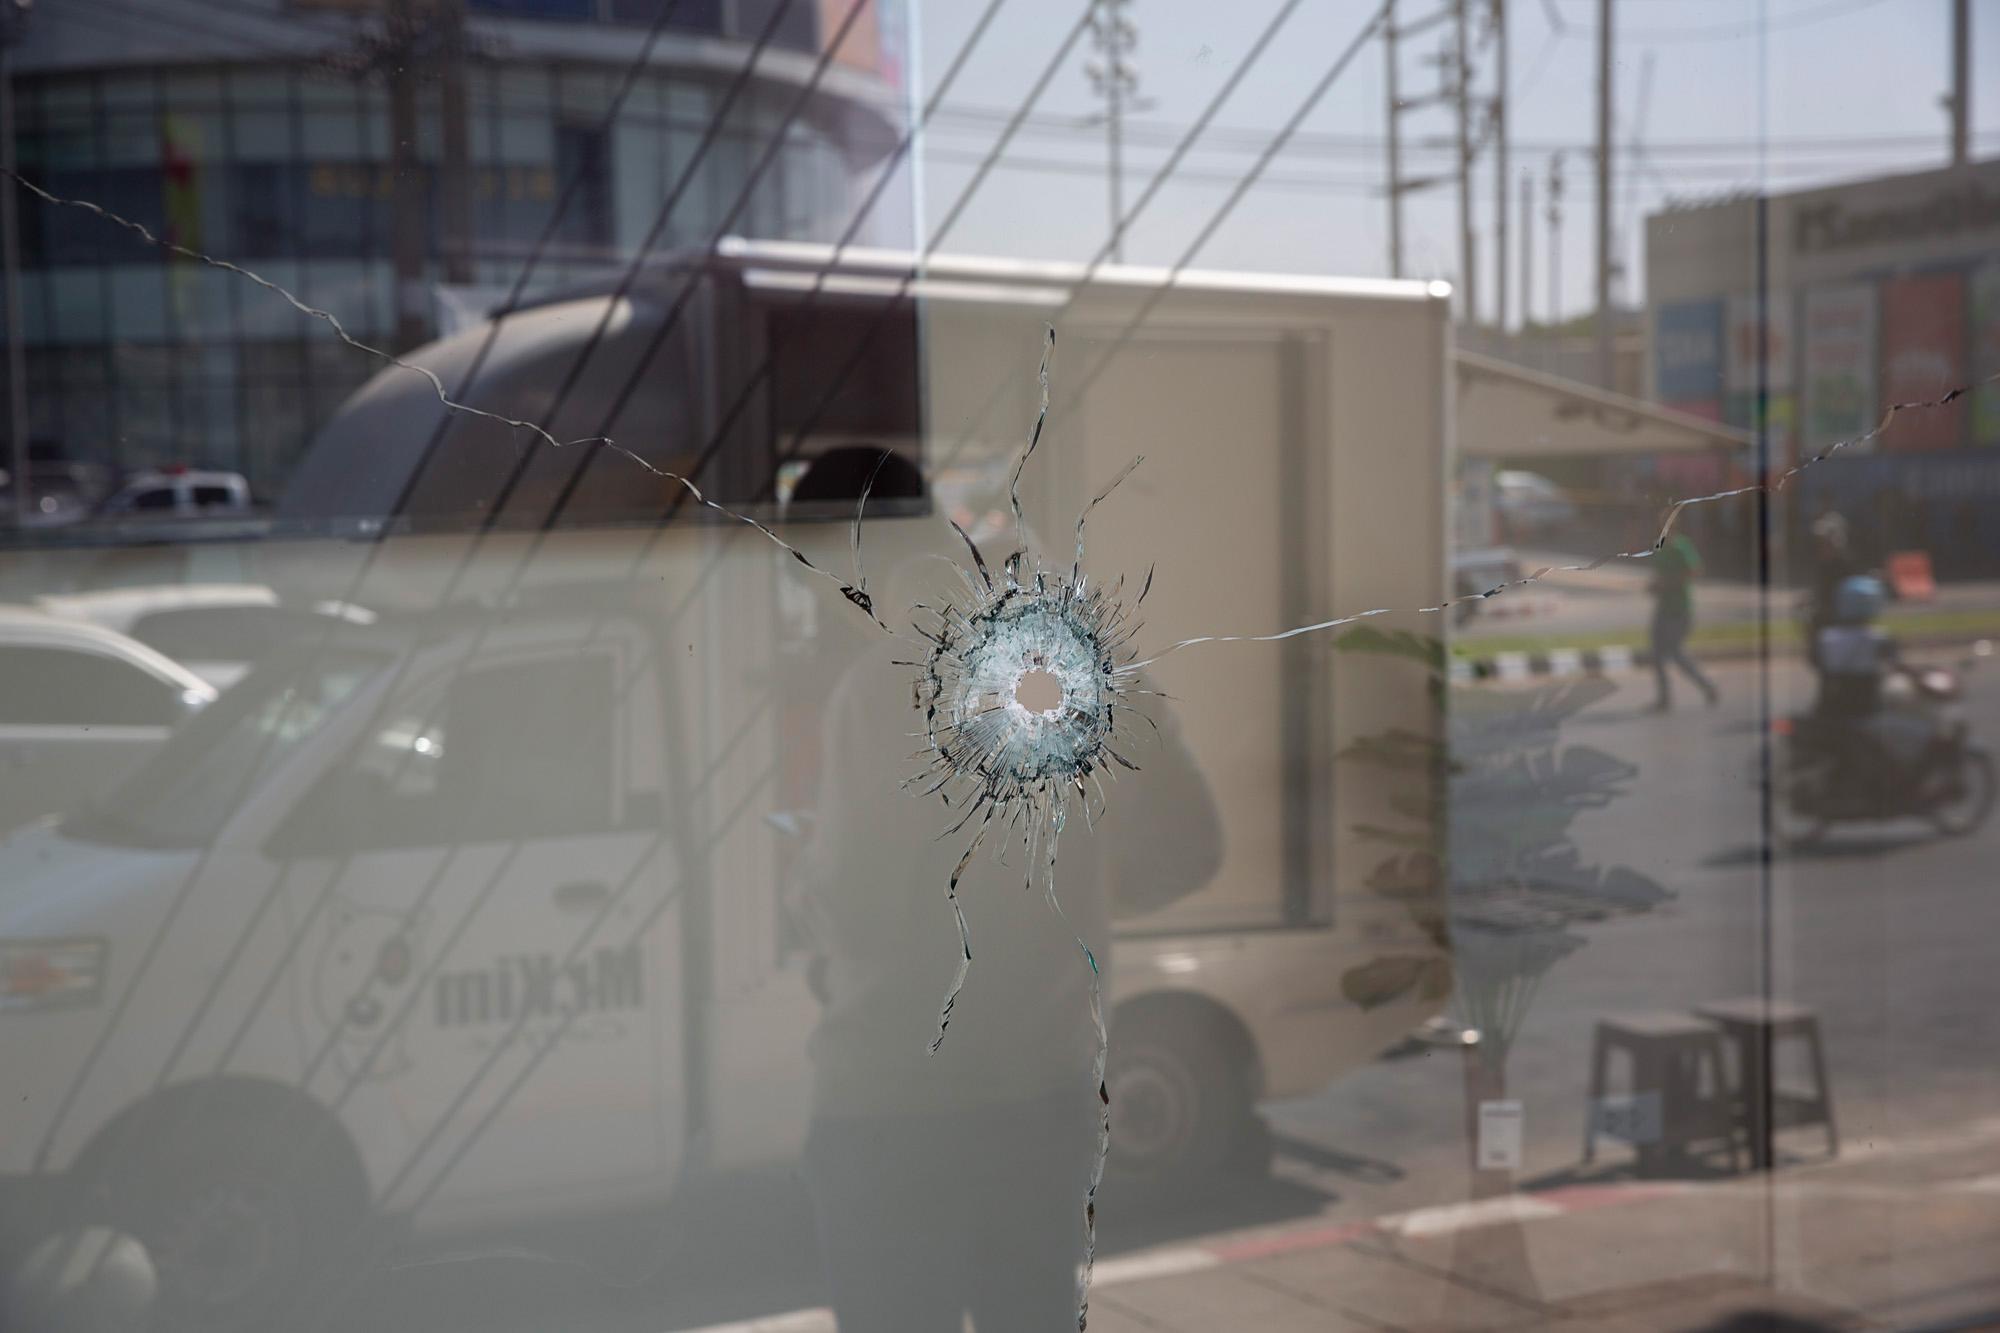 Shooting in Korat, Thailand: The New York Times - A bullet hole created by gunfire from Seargent Major...